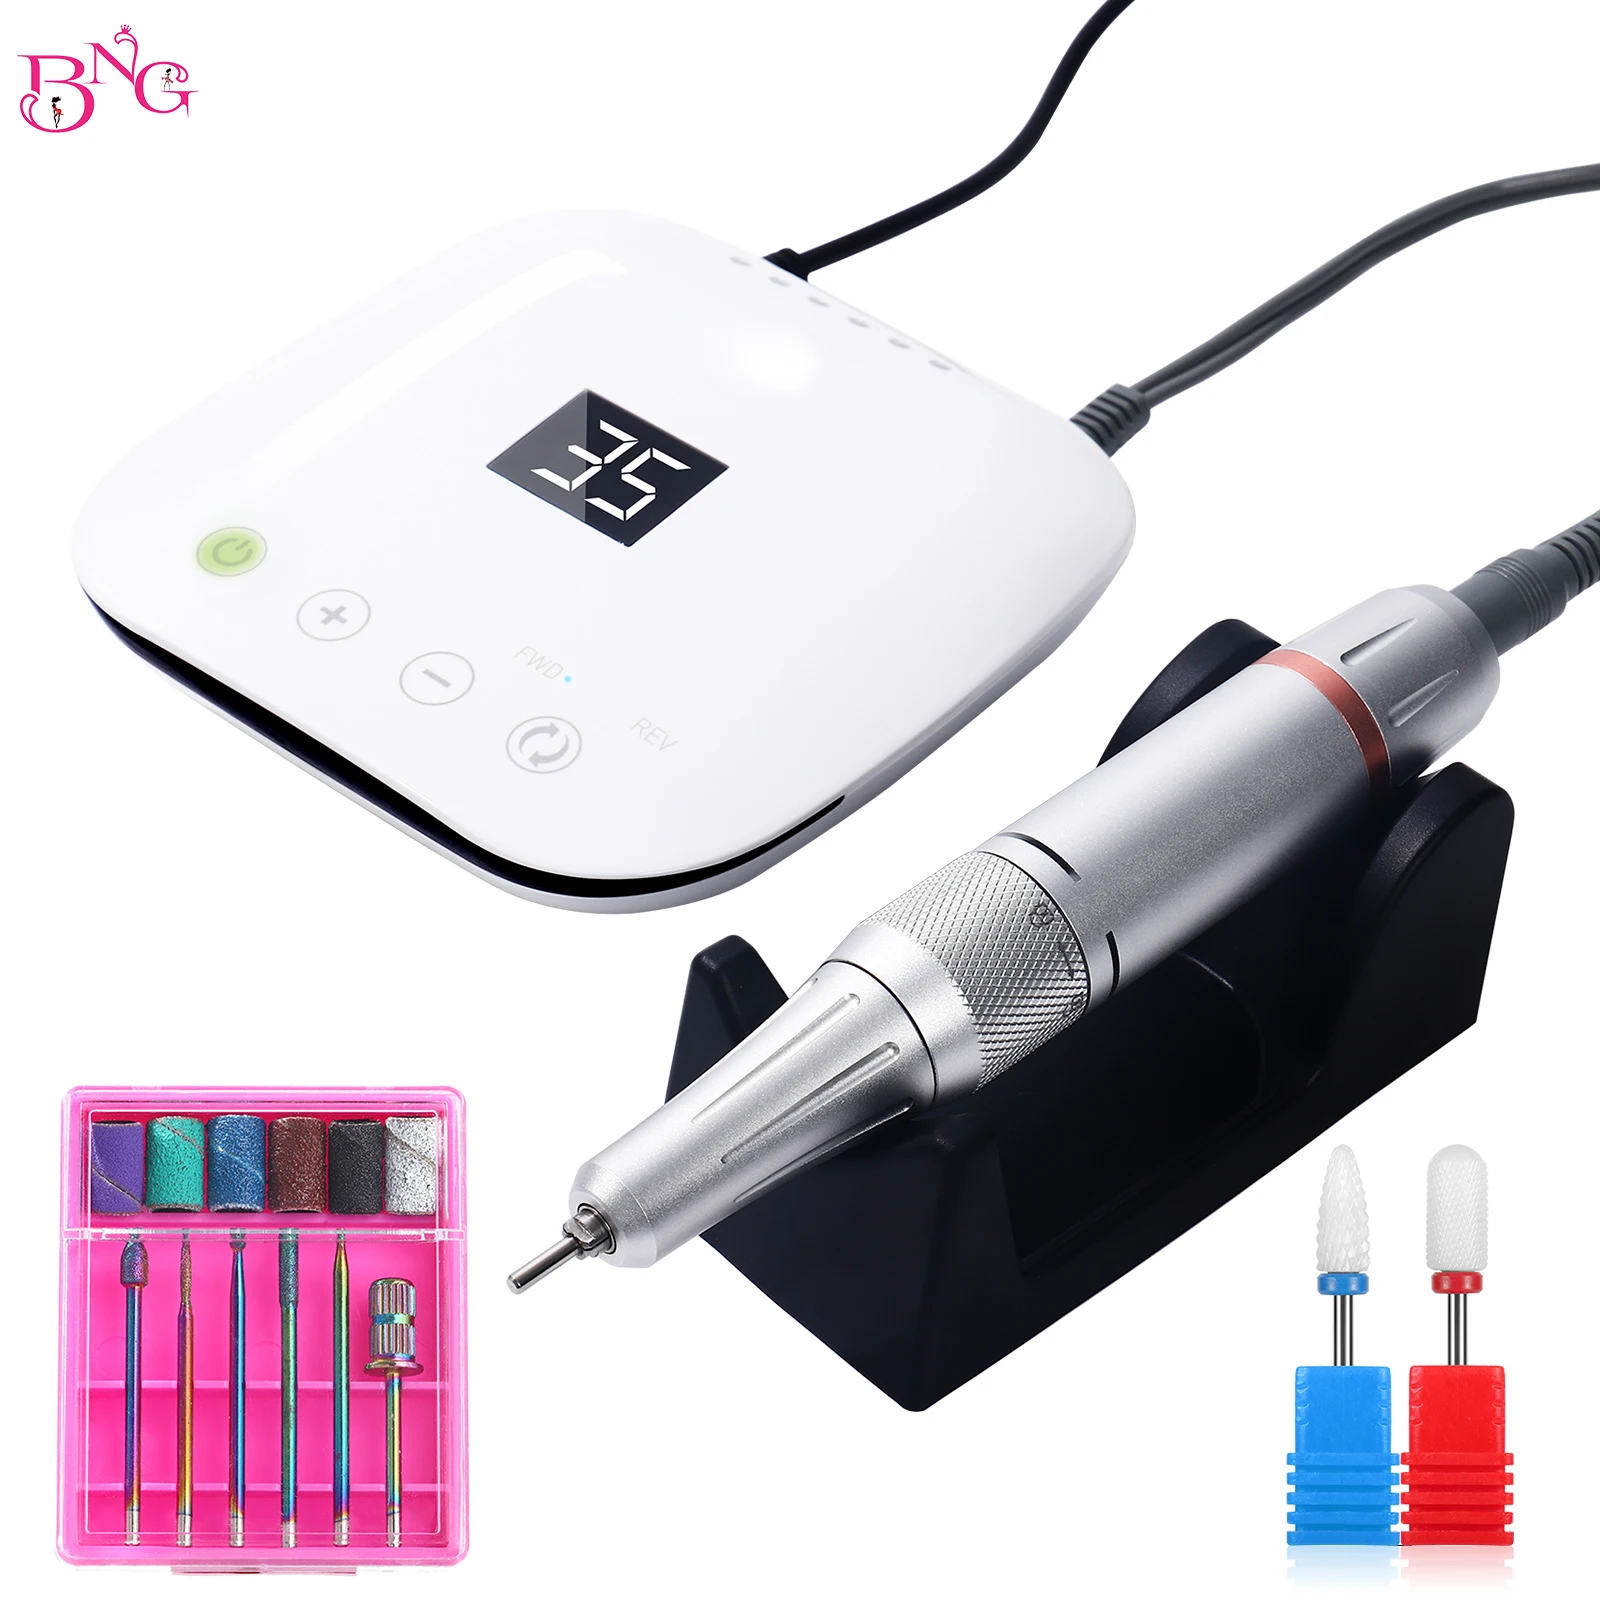 35000RPM High Speed Low Noise Smart Fast Nail Drill Manicure Machine Mill Cutter Drill Bits Set Easy Touch Display Equipment